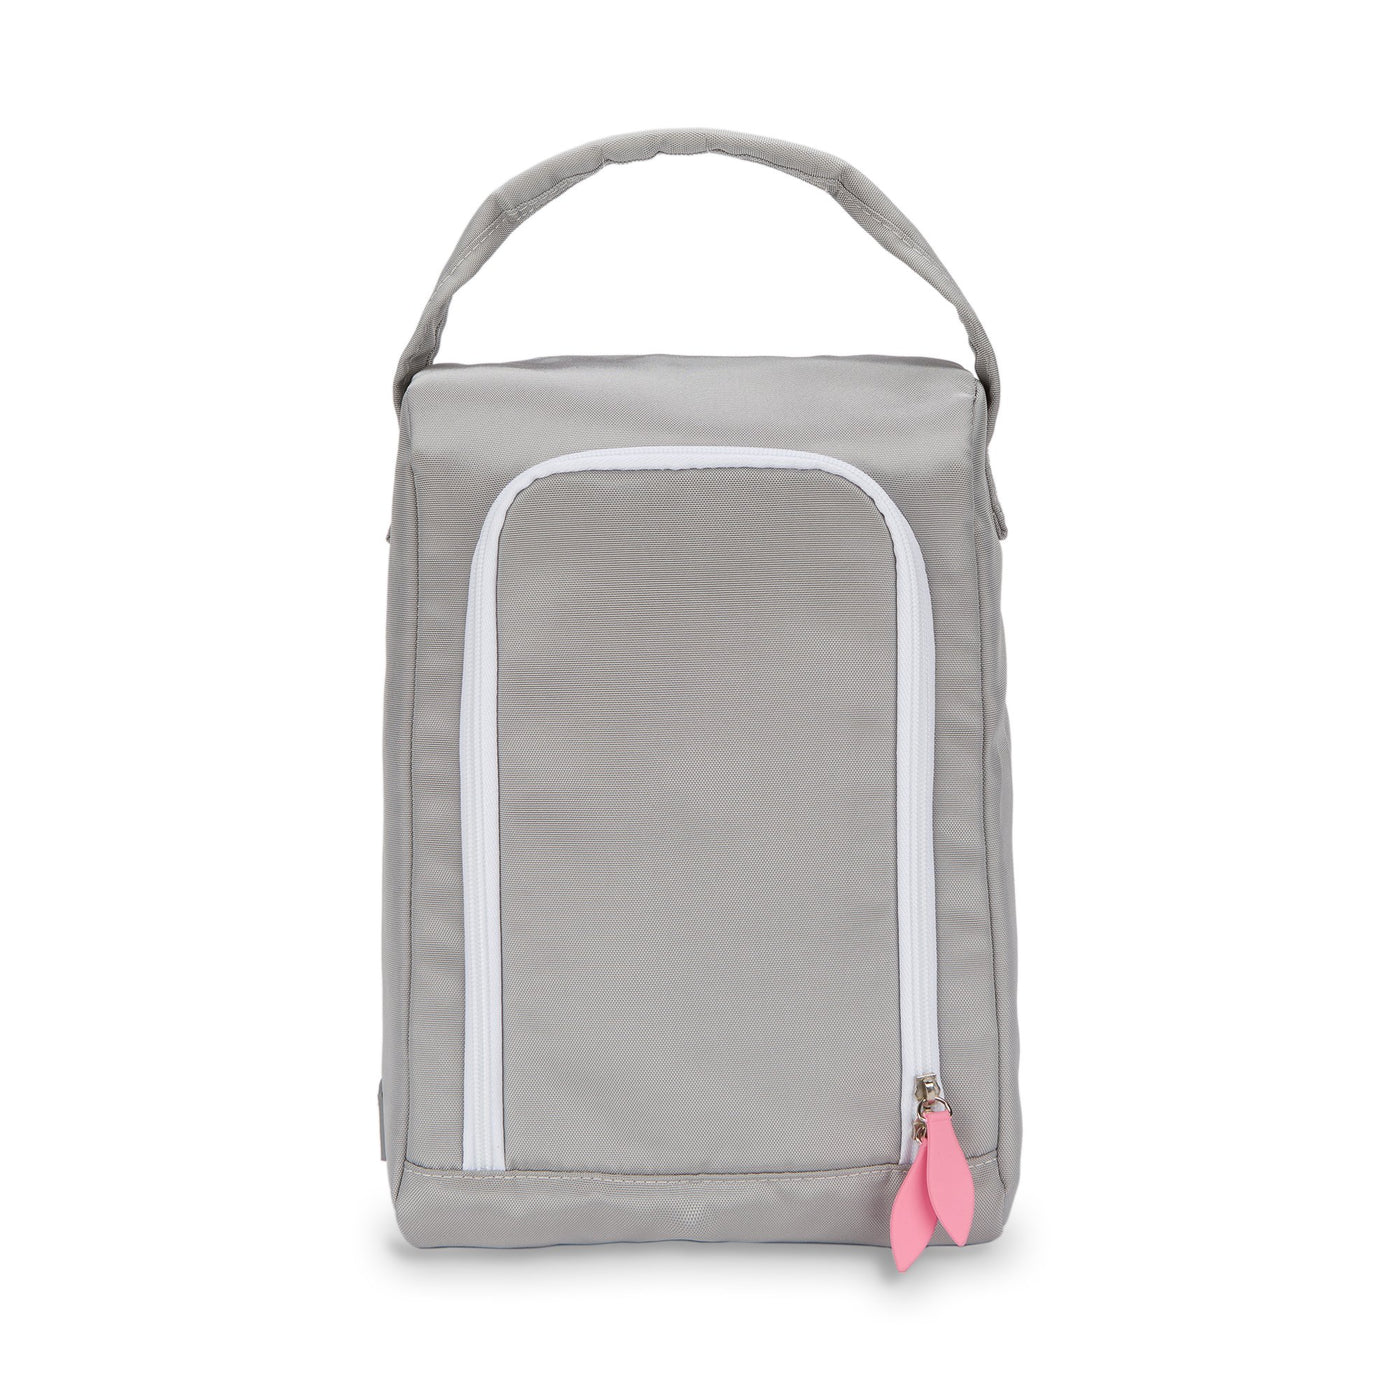 front view of grey shoe bag with pink zippers.